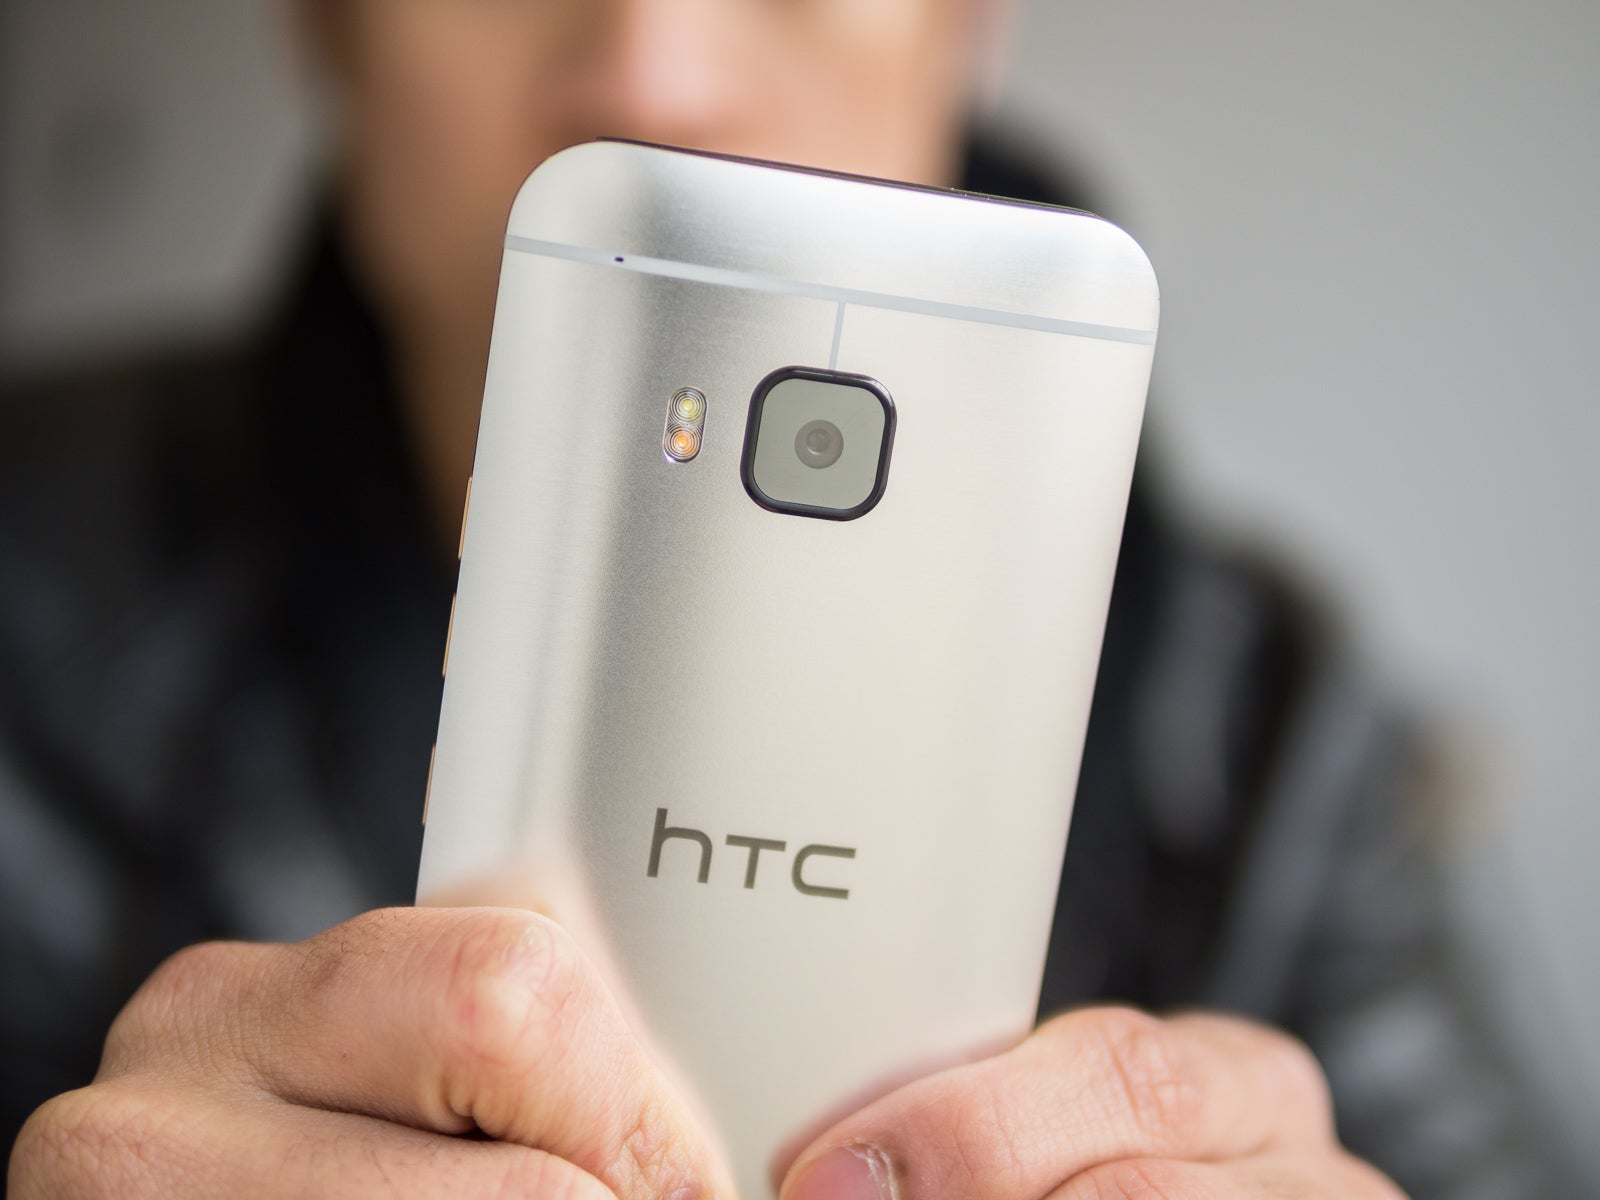 The harbinger of doom itself - Why did HTC smartphones go from popular to obscure?